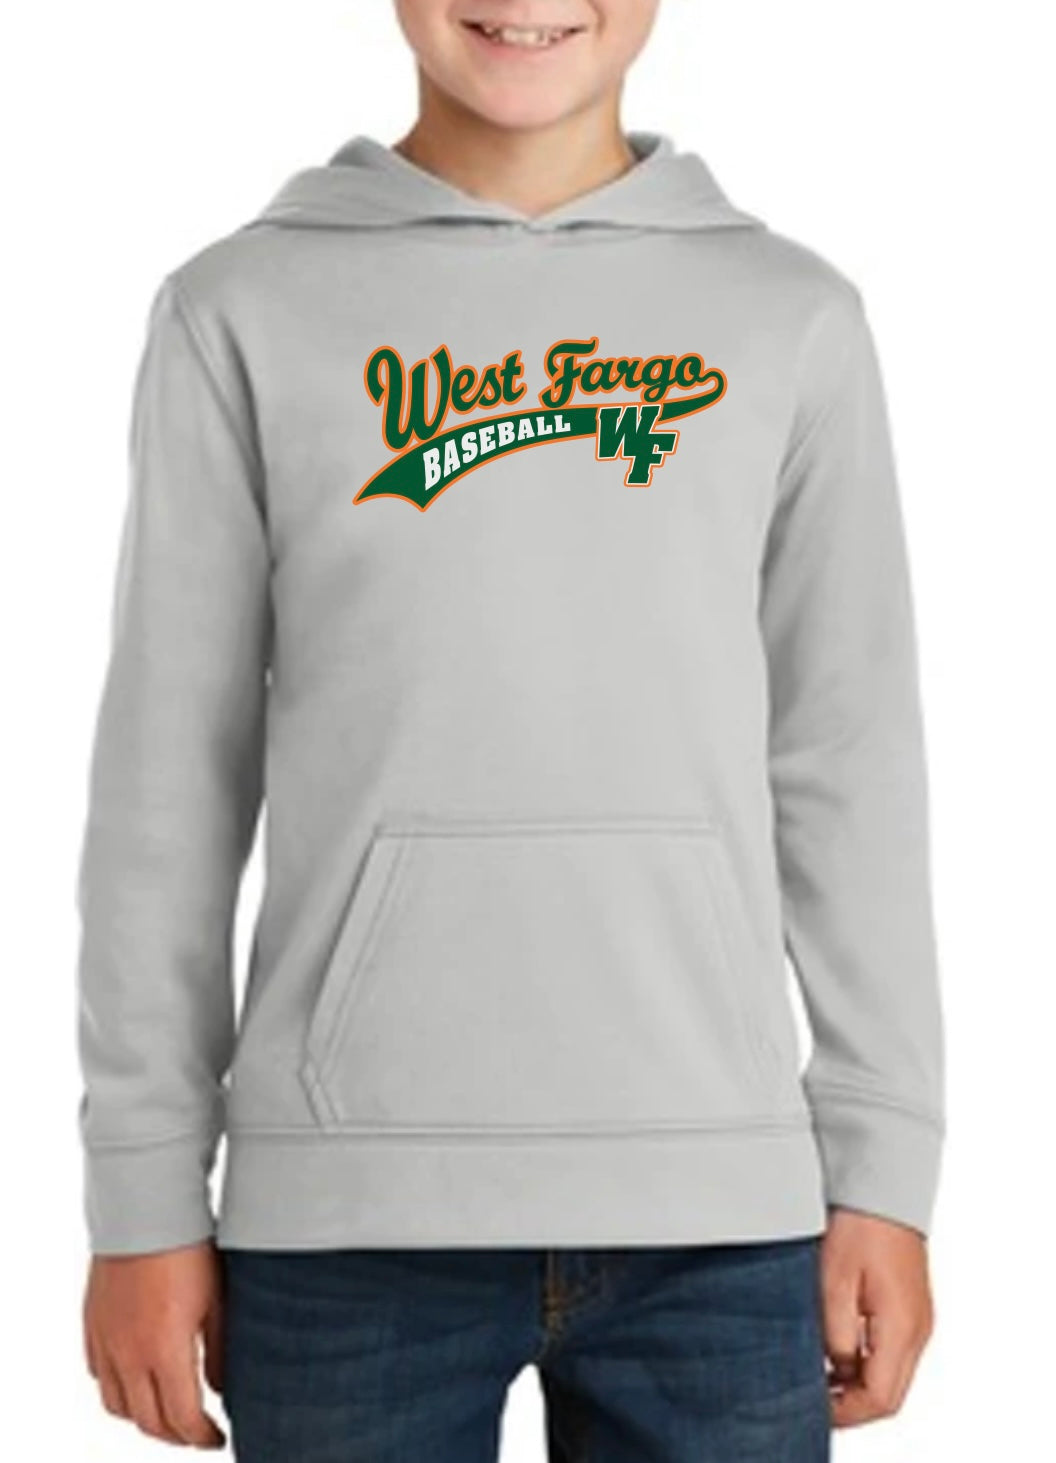 Youth Dry Fit West Fargo Baseball Hoodie